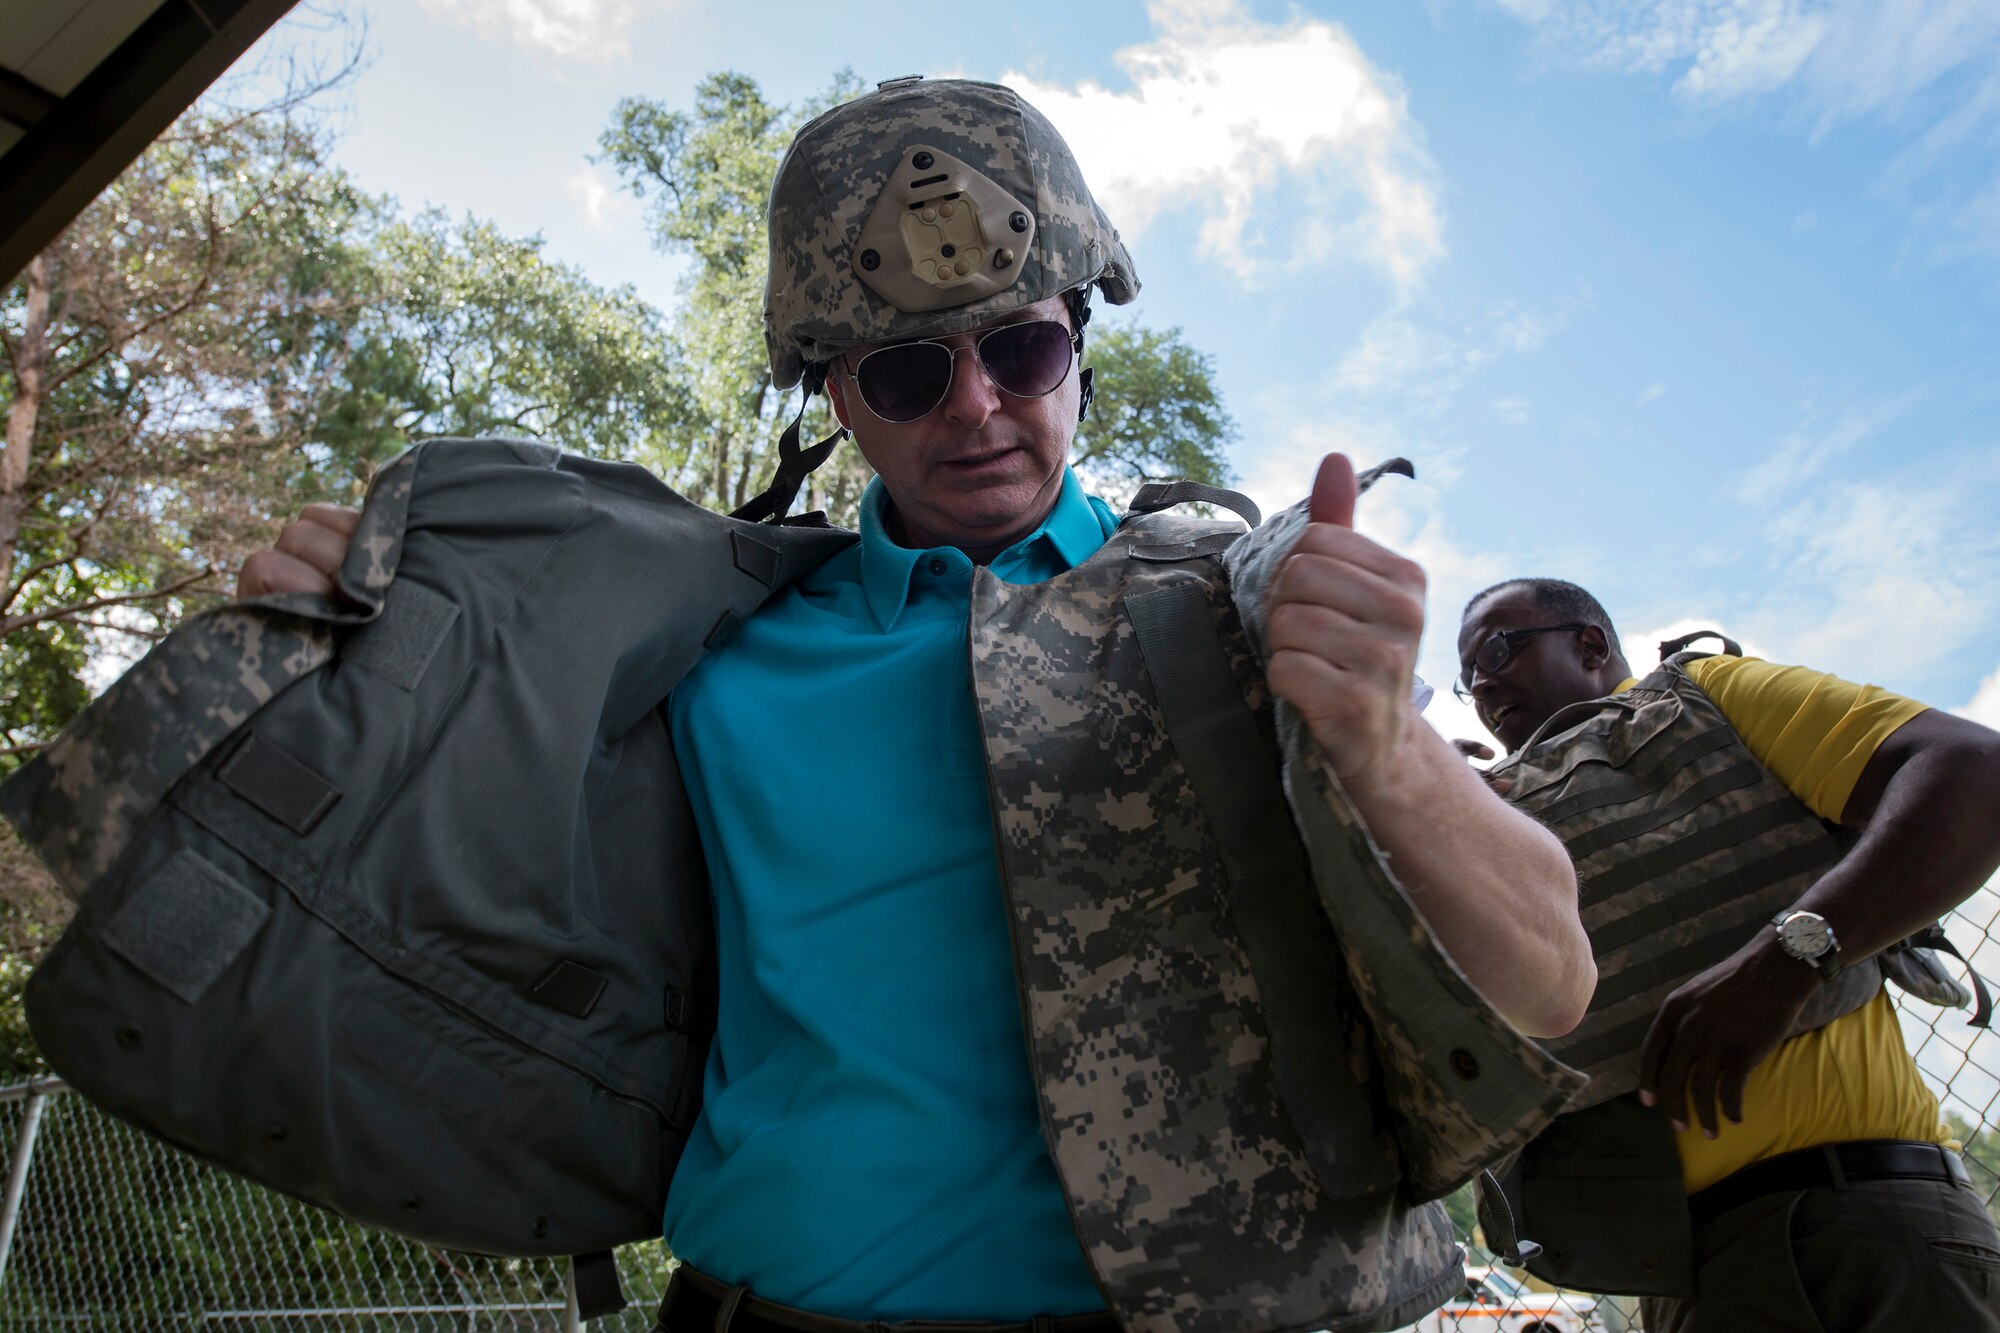 Tim Tynan, left, Joint Civilian Orientation Course (JCOC) 88 member, puts on a military vest, June 13, 2018, at Moody Air Force Base, Ga. The mission of JCOC is to increase the public’s understanding of the military through engagements between the armed forces and course members. (U.S. Air Force photo by Airman 1st Class Eugene Oliver)